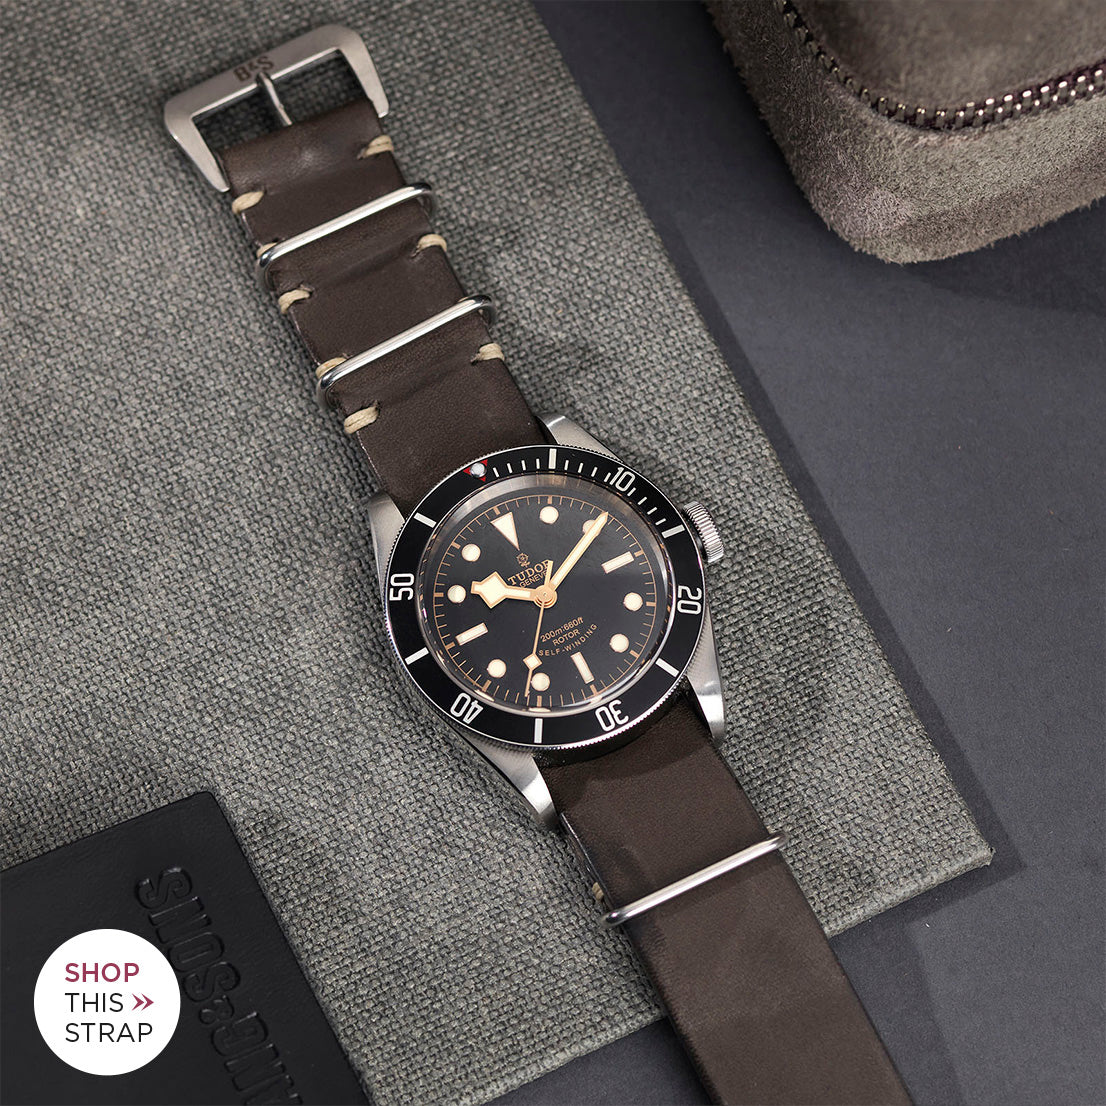 Bulang and Sons_Strap Guide_The Tudor Black Bay Black 79220N_Piombo Grey Nato Leather Watch Strap